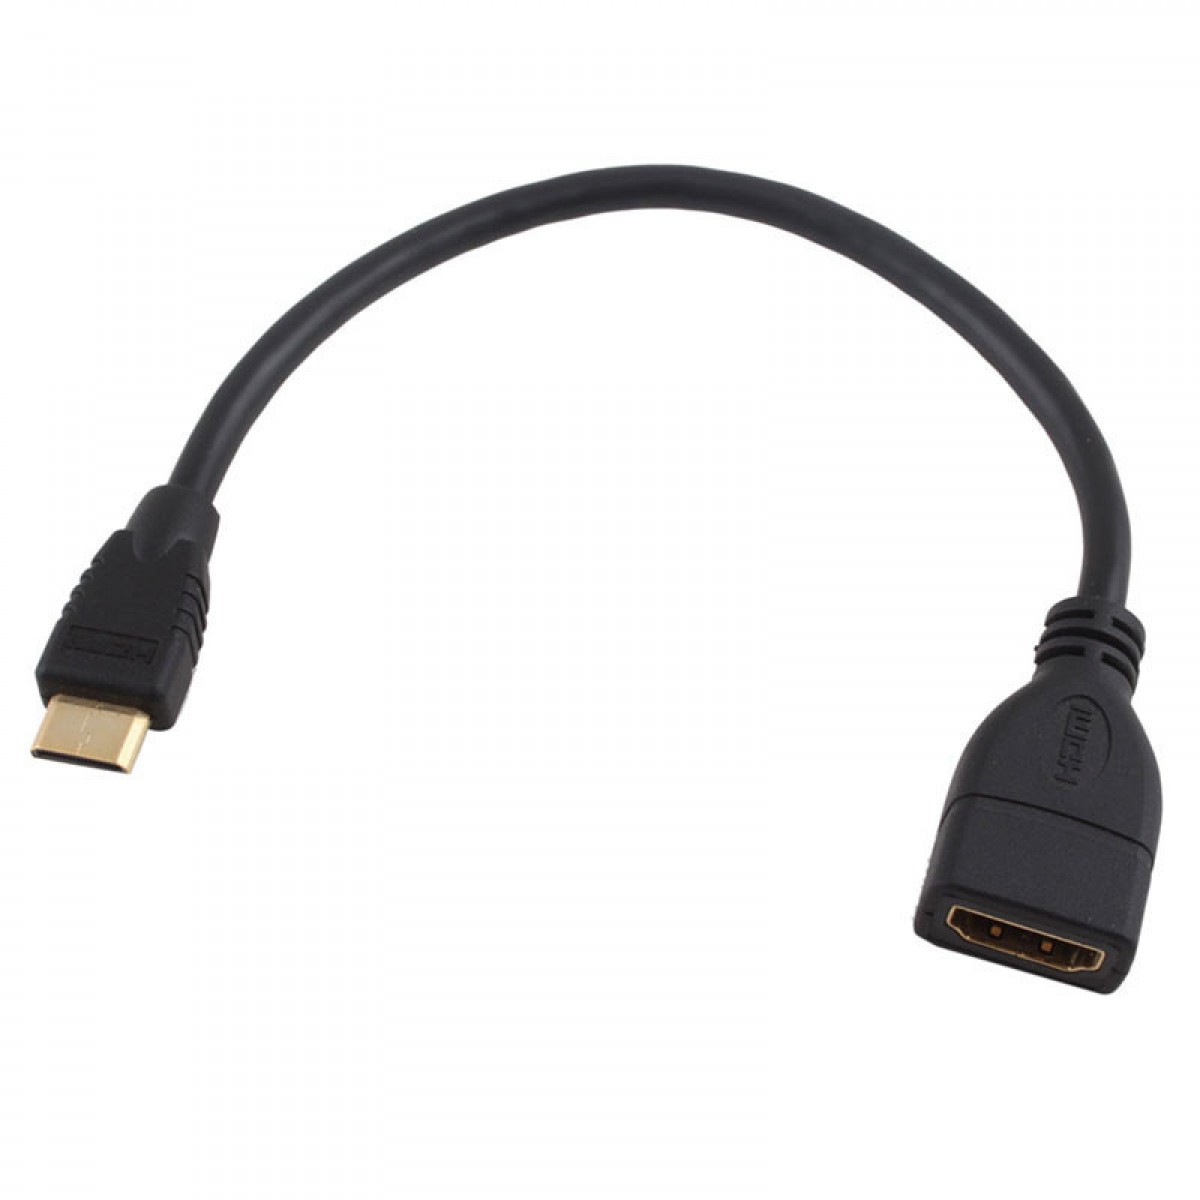 20cm Male HDMI to Female HDMI Adapter for D3200 Camera Keple.com